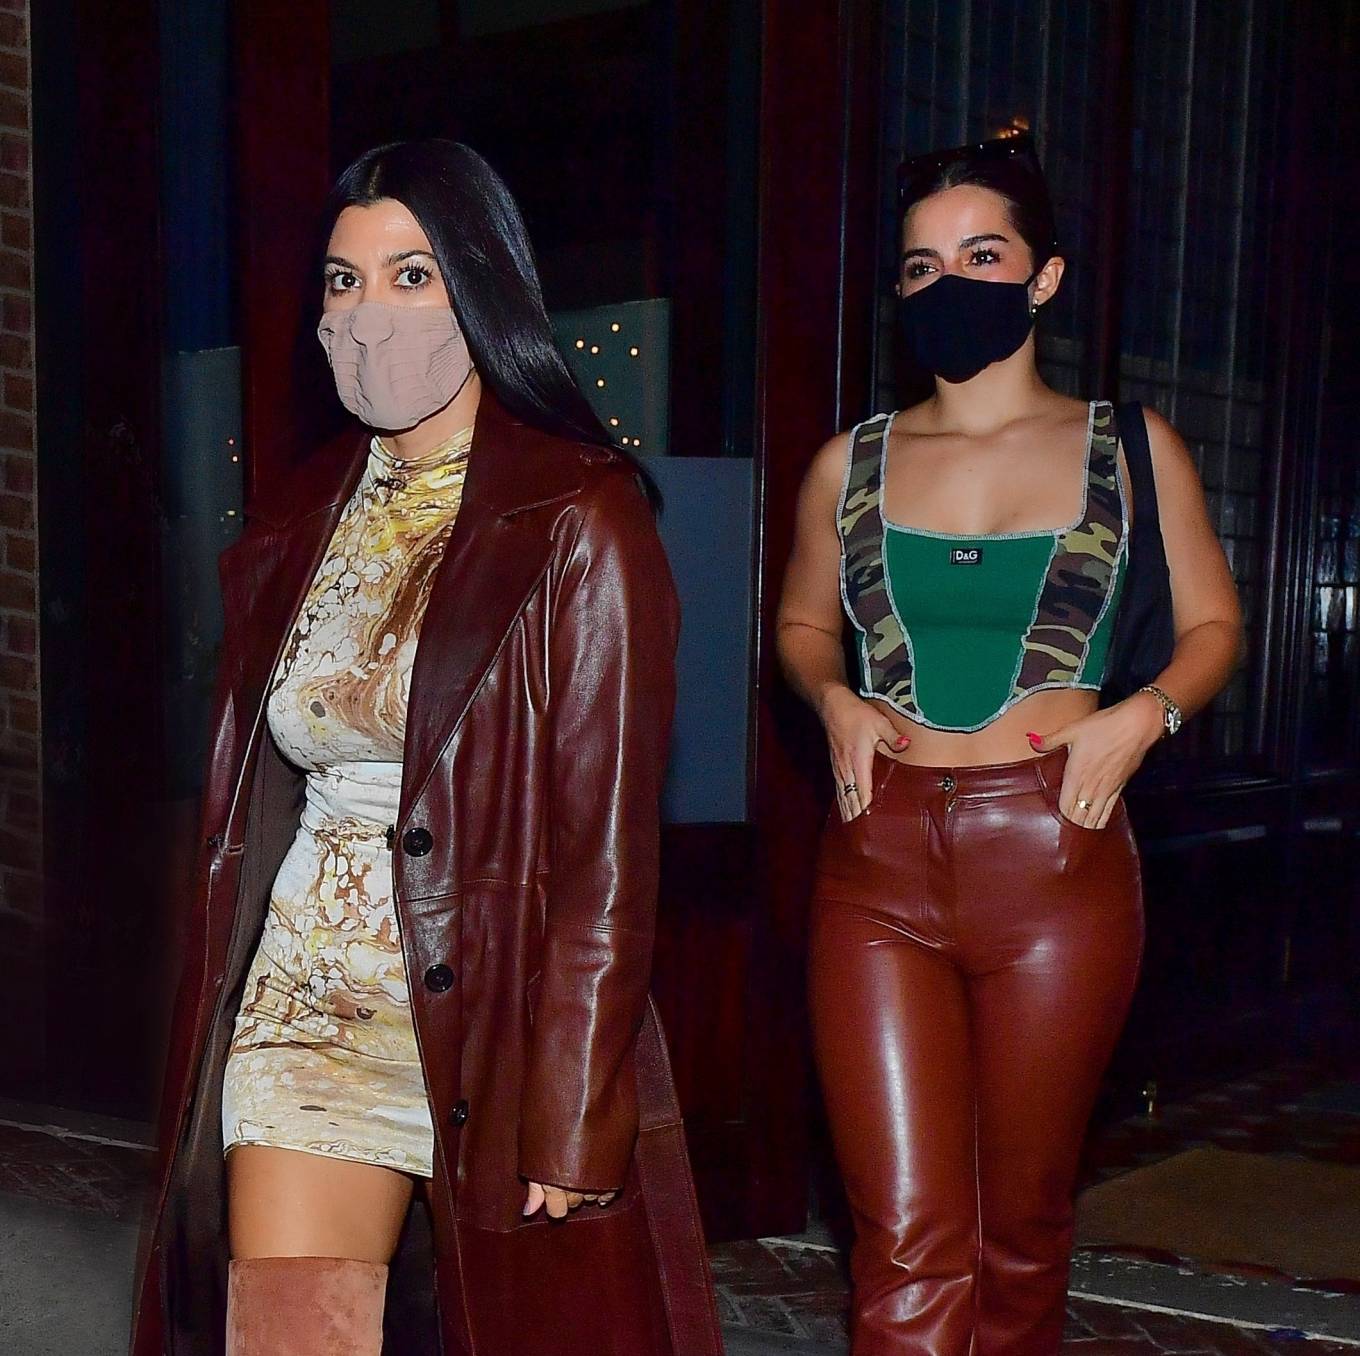 Addison Rae and Kourtney Kardashian - Night out for a girls night in New York City